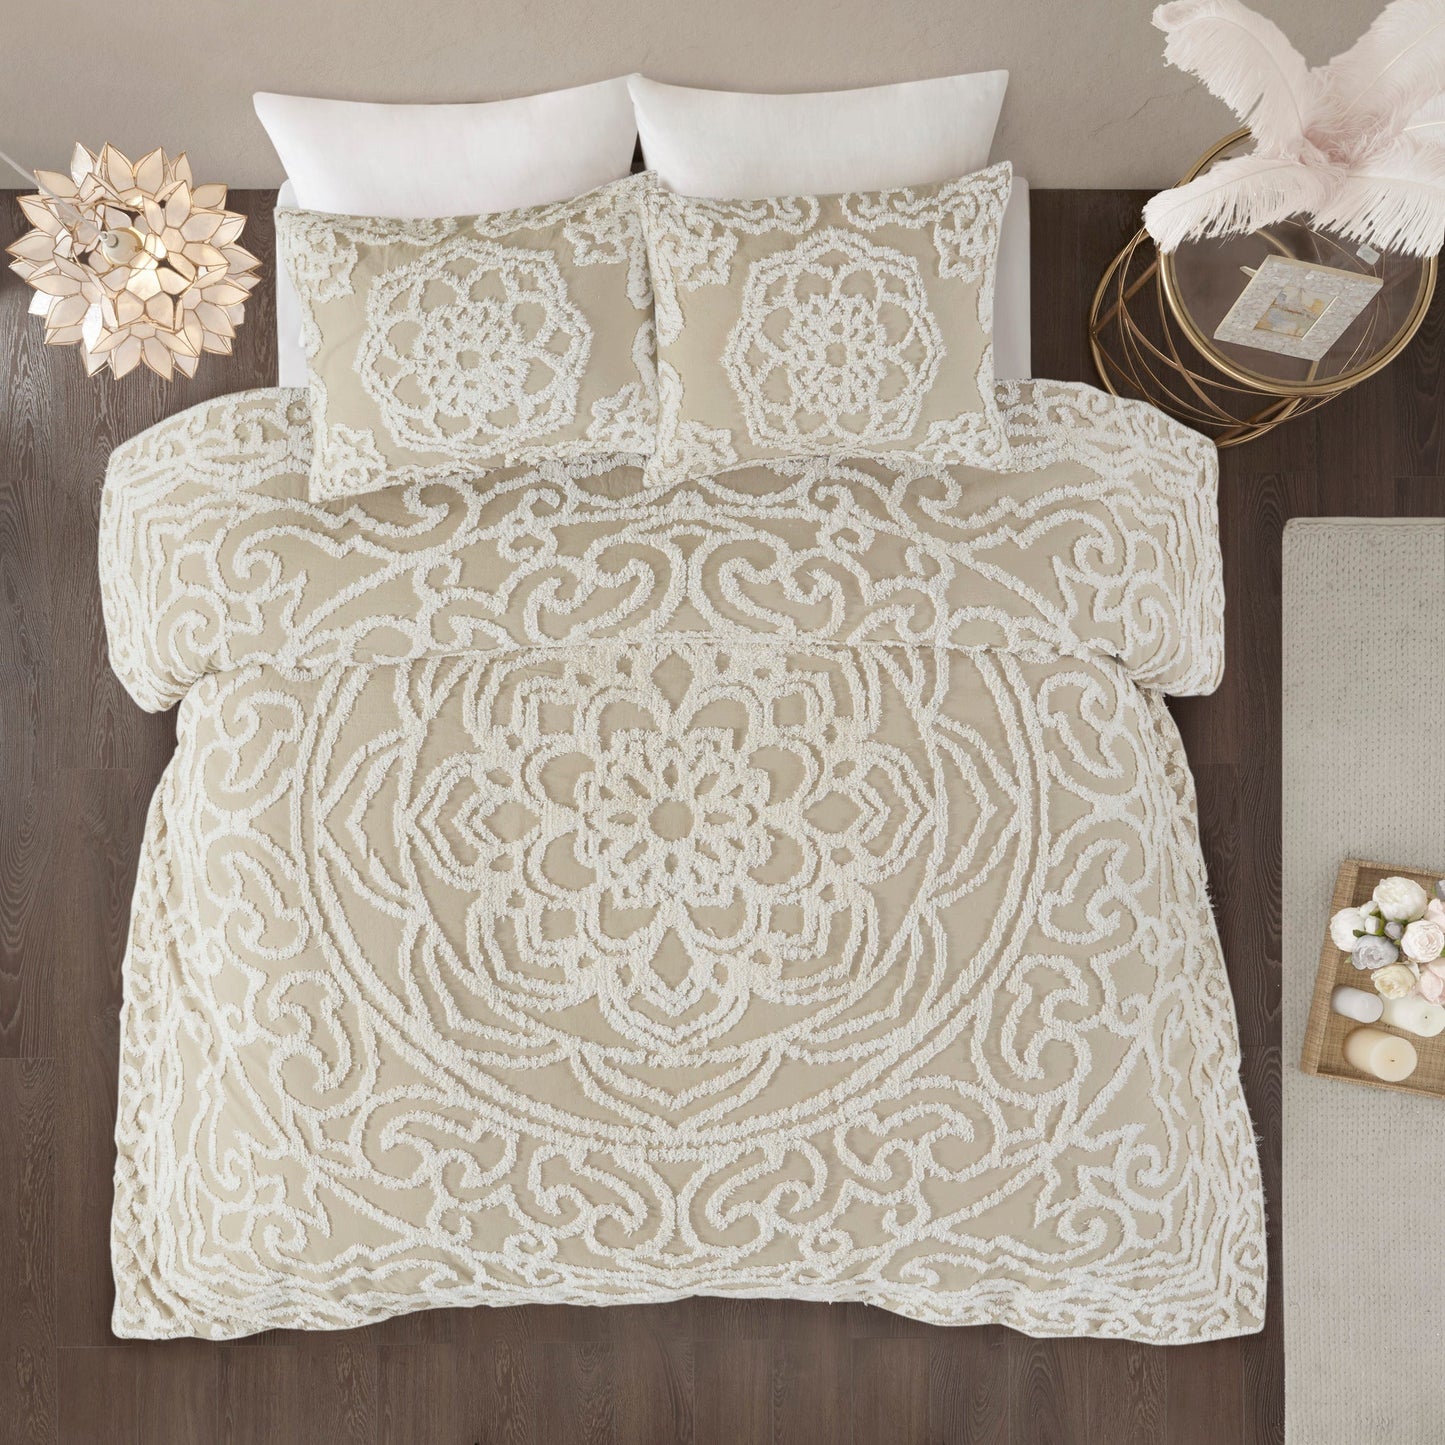 Cecily Tufted Cotton Chenille Medallion Comforter Set Taupe